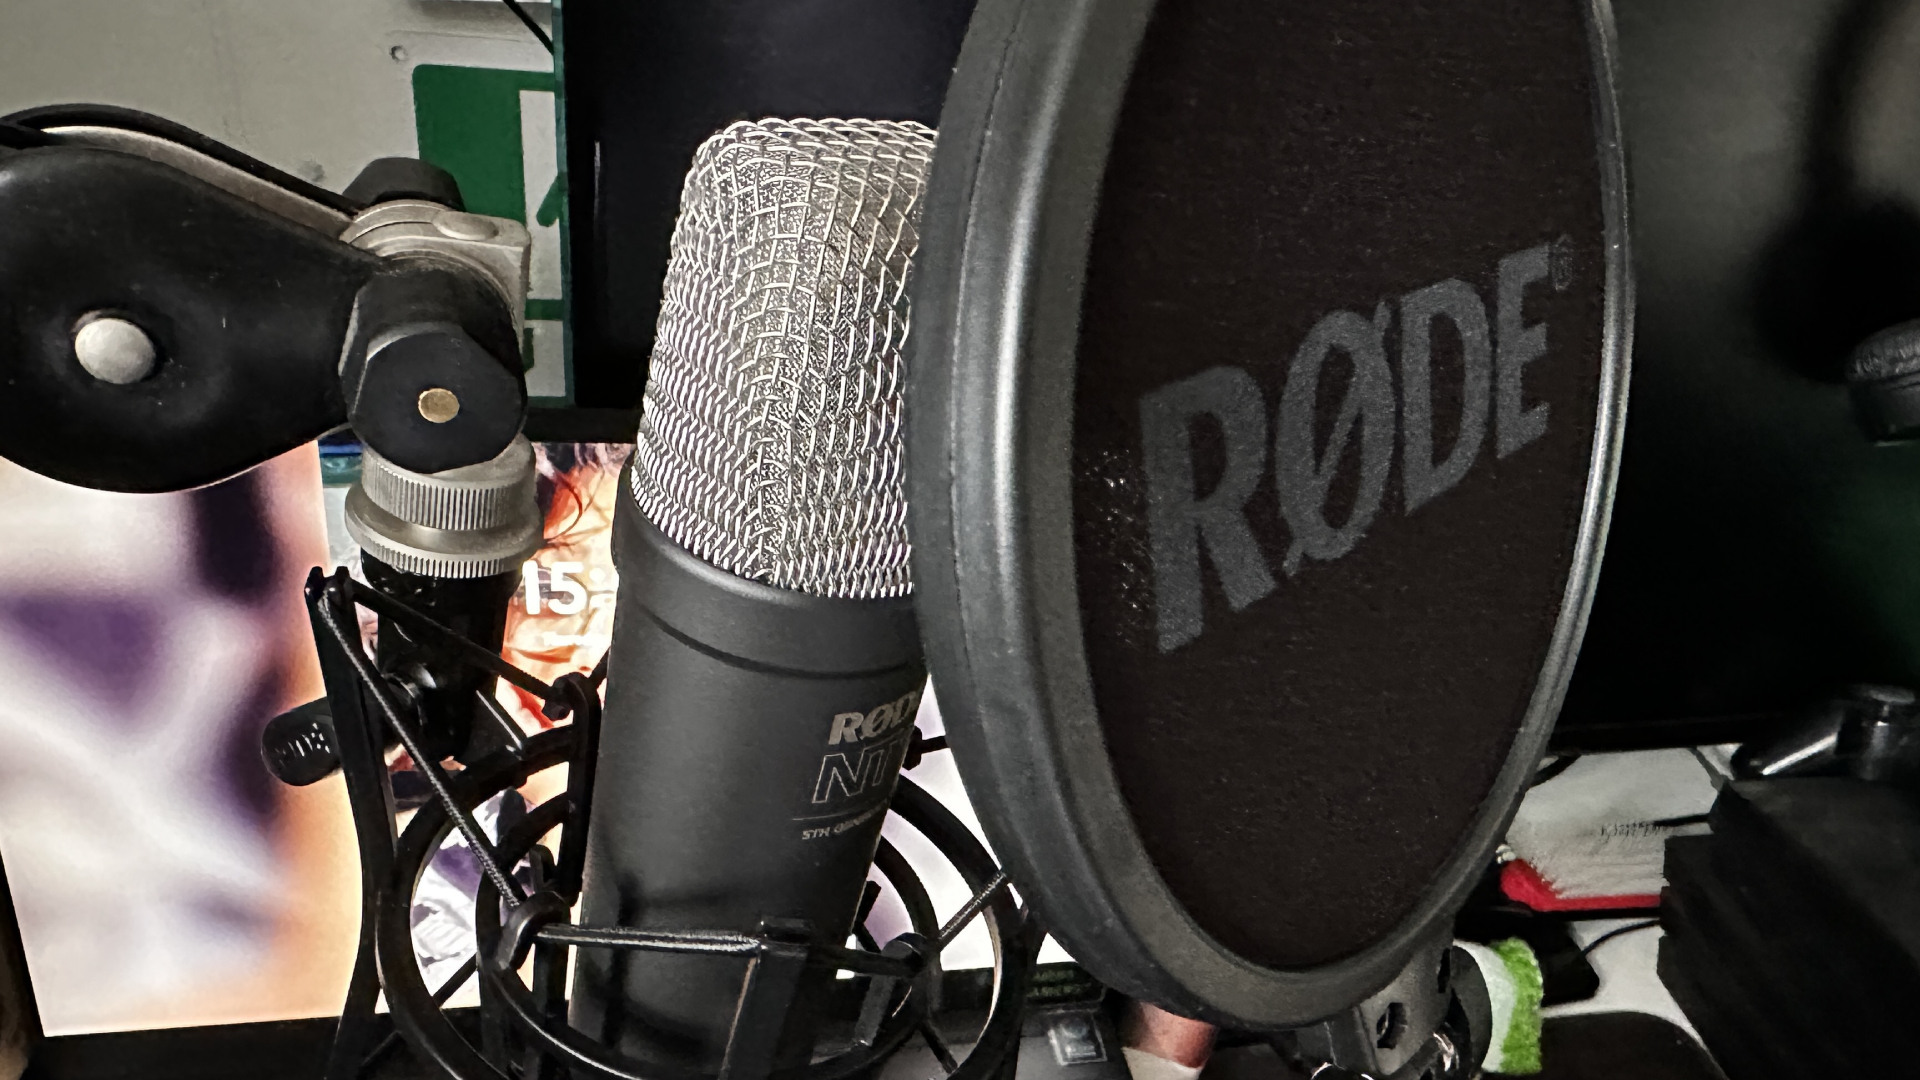 RODE NT1 Microphone with Vocal Recording Setup Kit